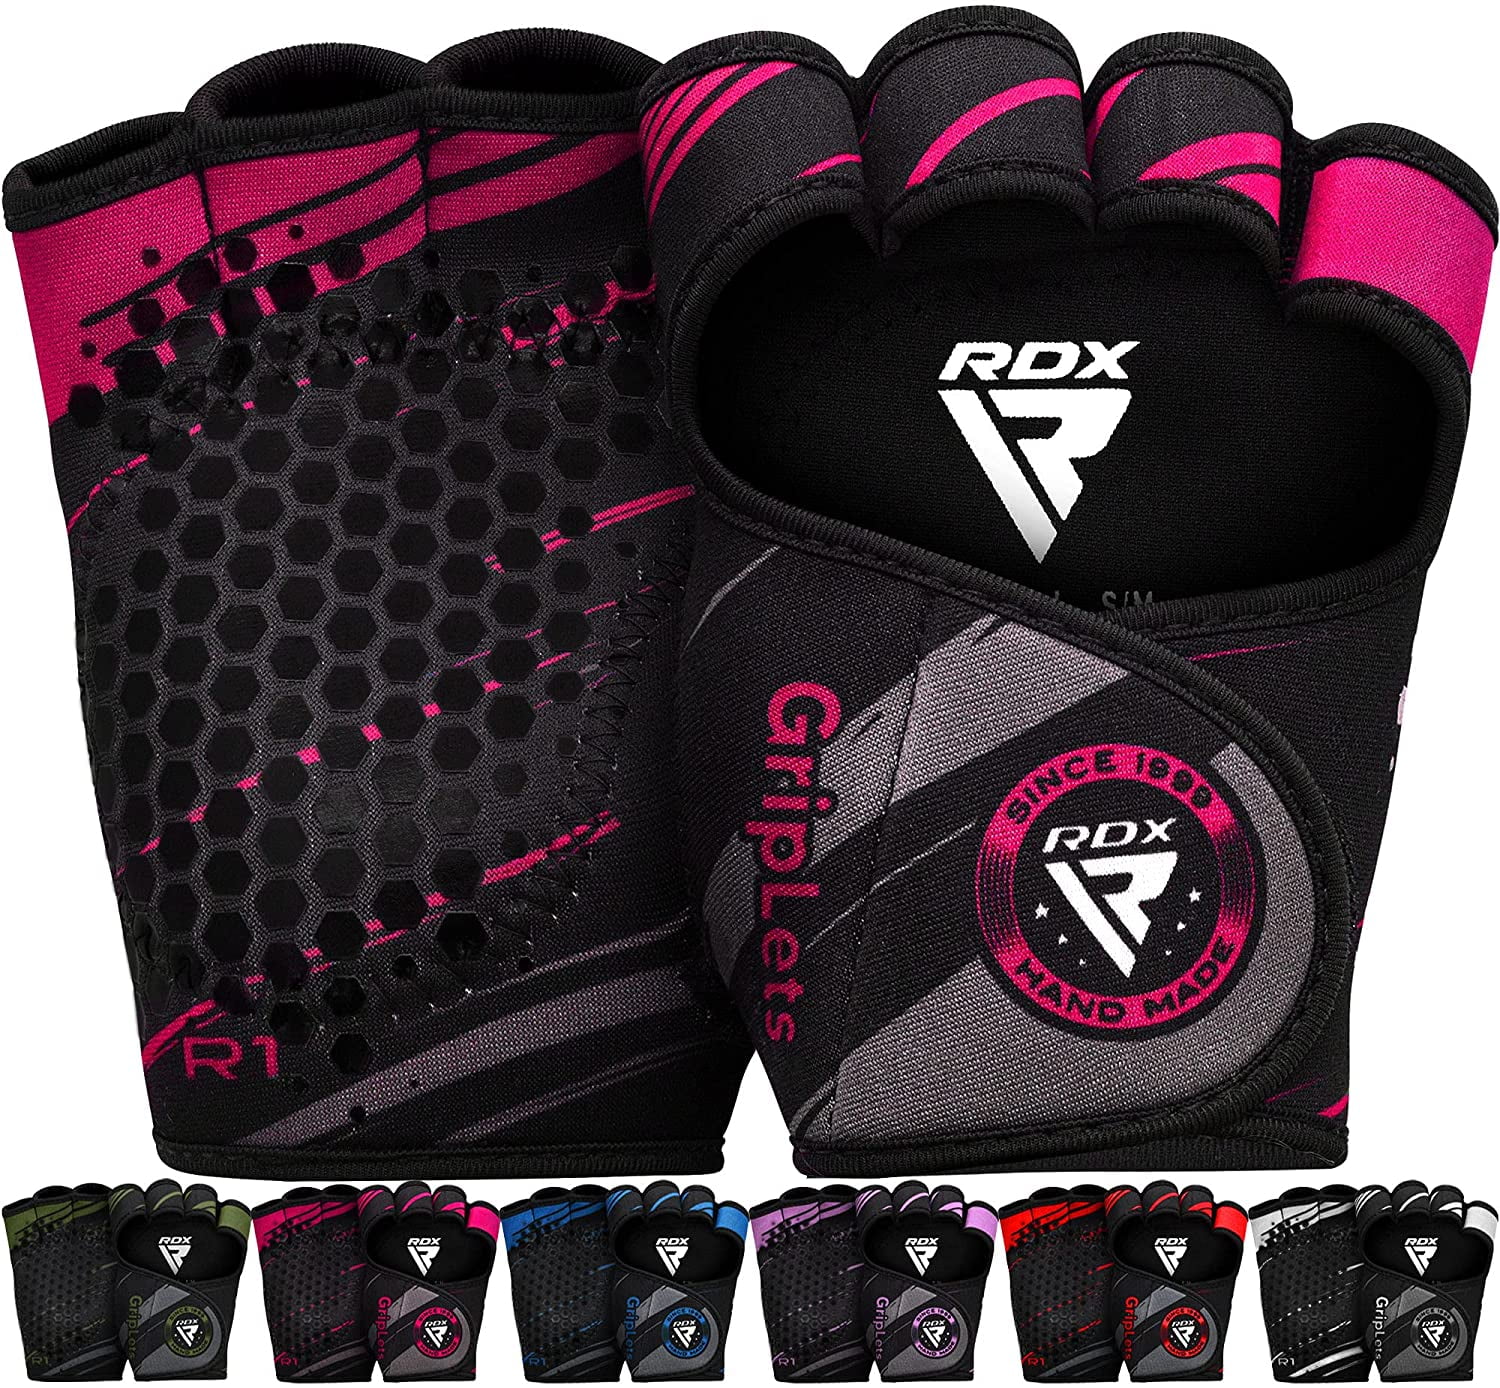 RDX Weight Lifting Gloves Grip Strength Training Gym Sports Fitness Training 